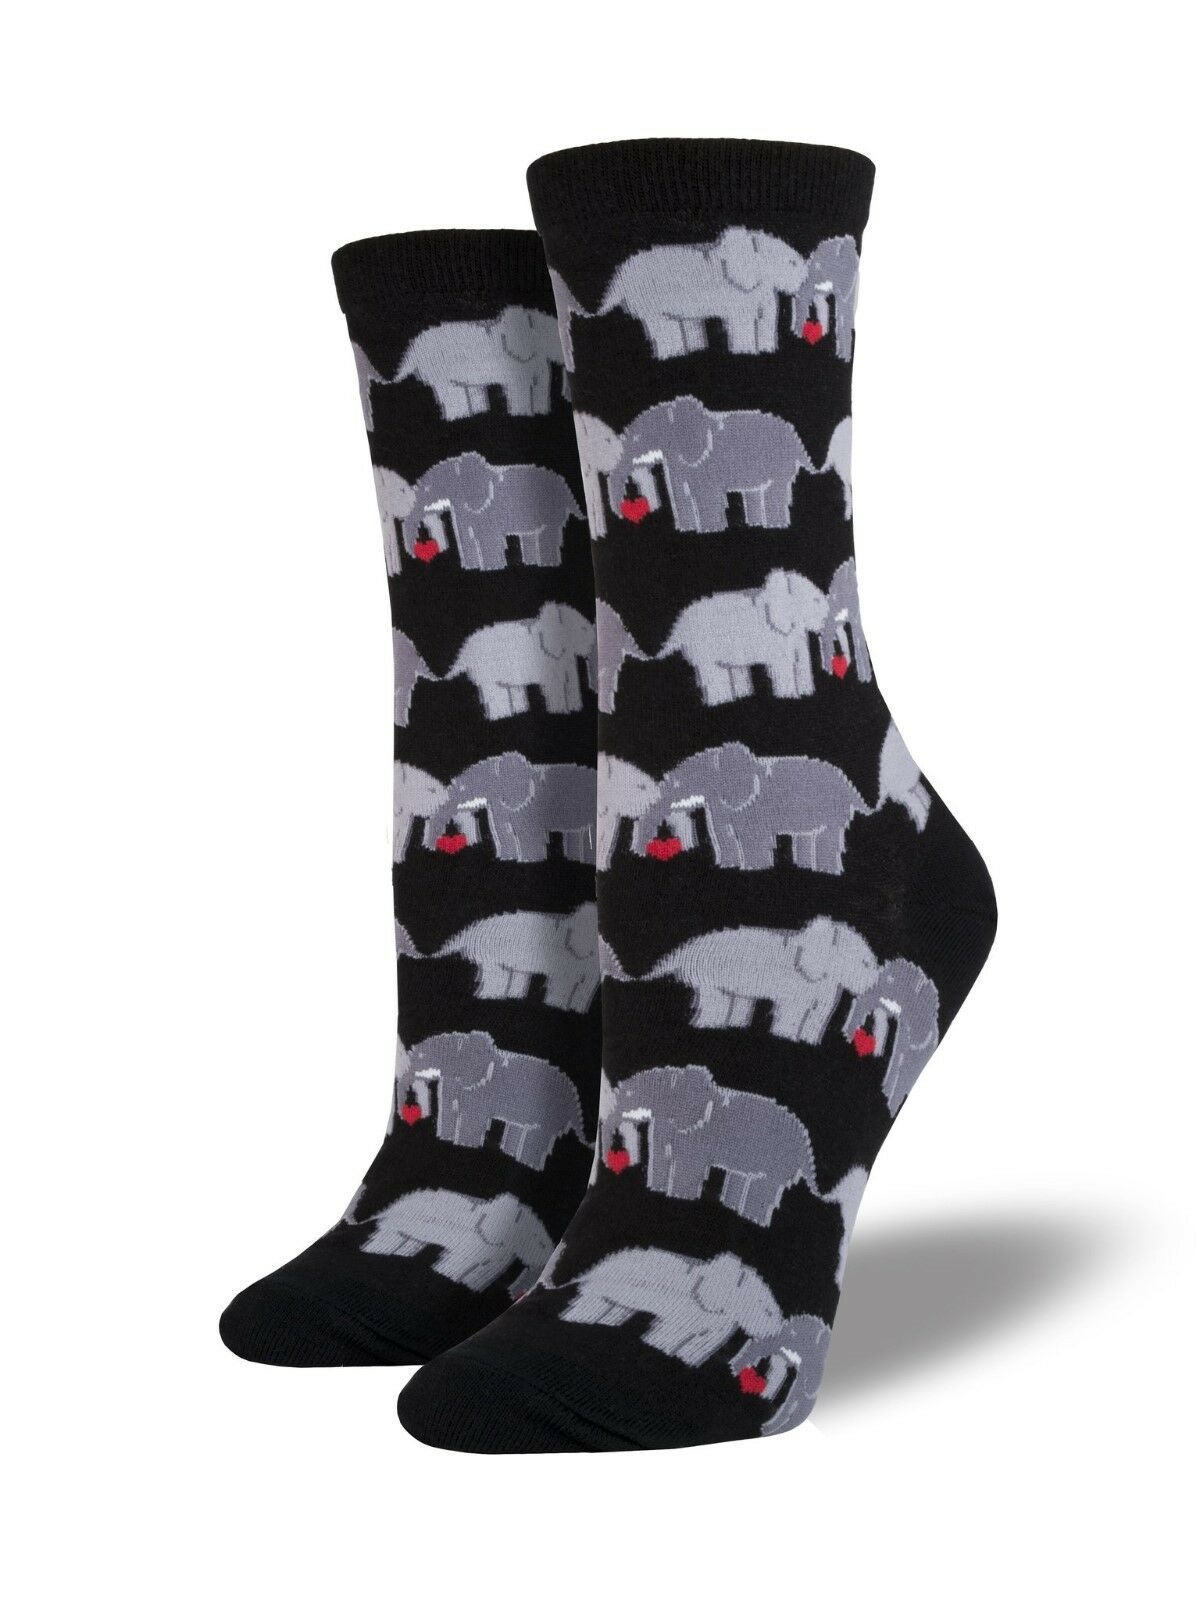 Primary image for Socksmith Women's Socks Novelty Crew Cut "Elephant Love" / Choose Your Color!!